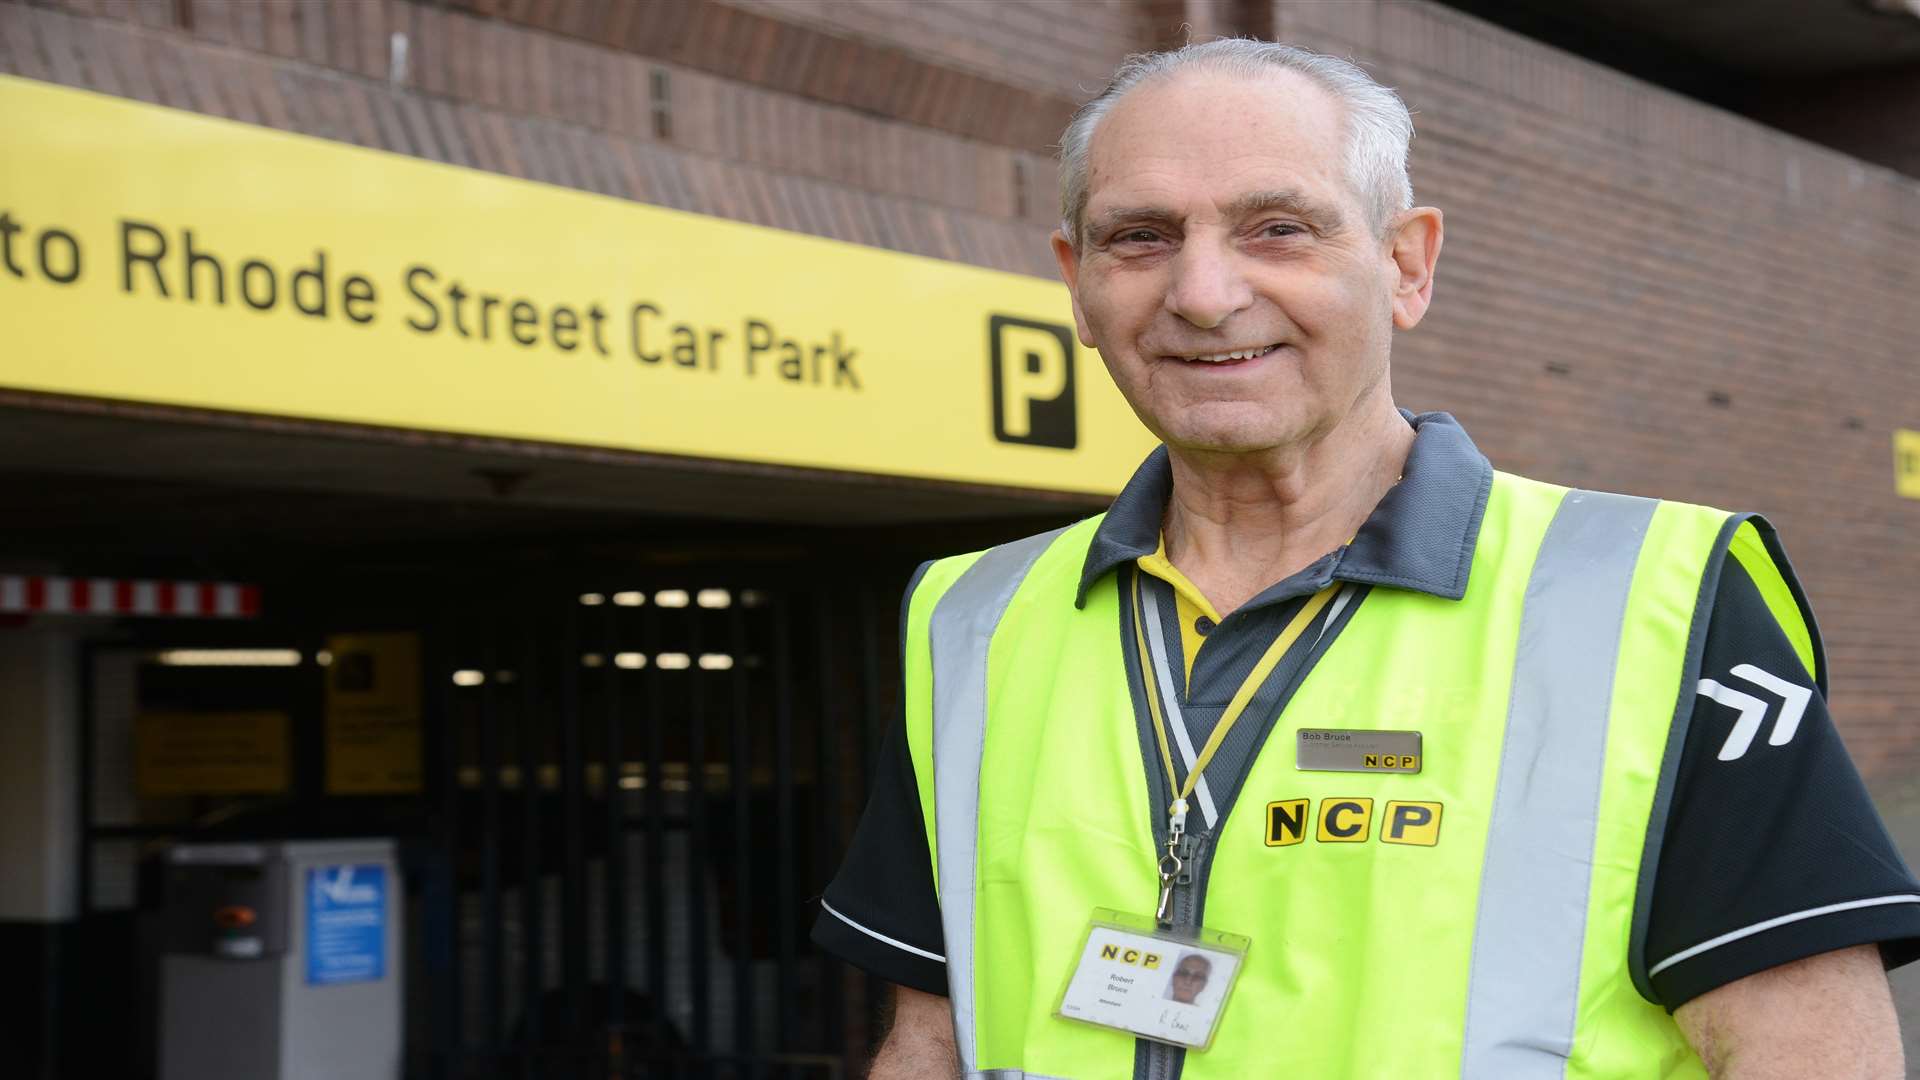 Bob Bruce, customer service assistant for NCP in Chatham, has been named Parking Person of the Year at the British Parking Awards